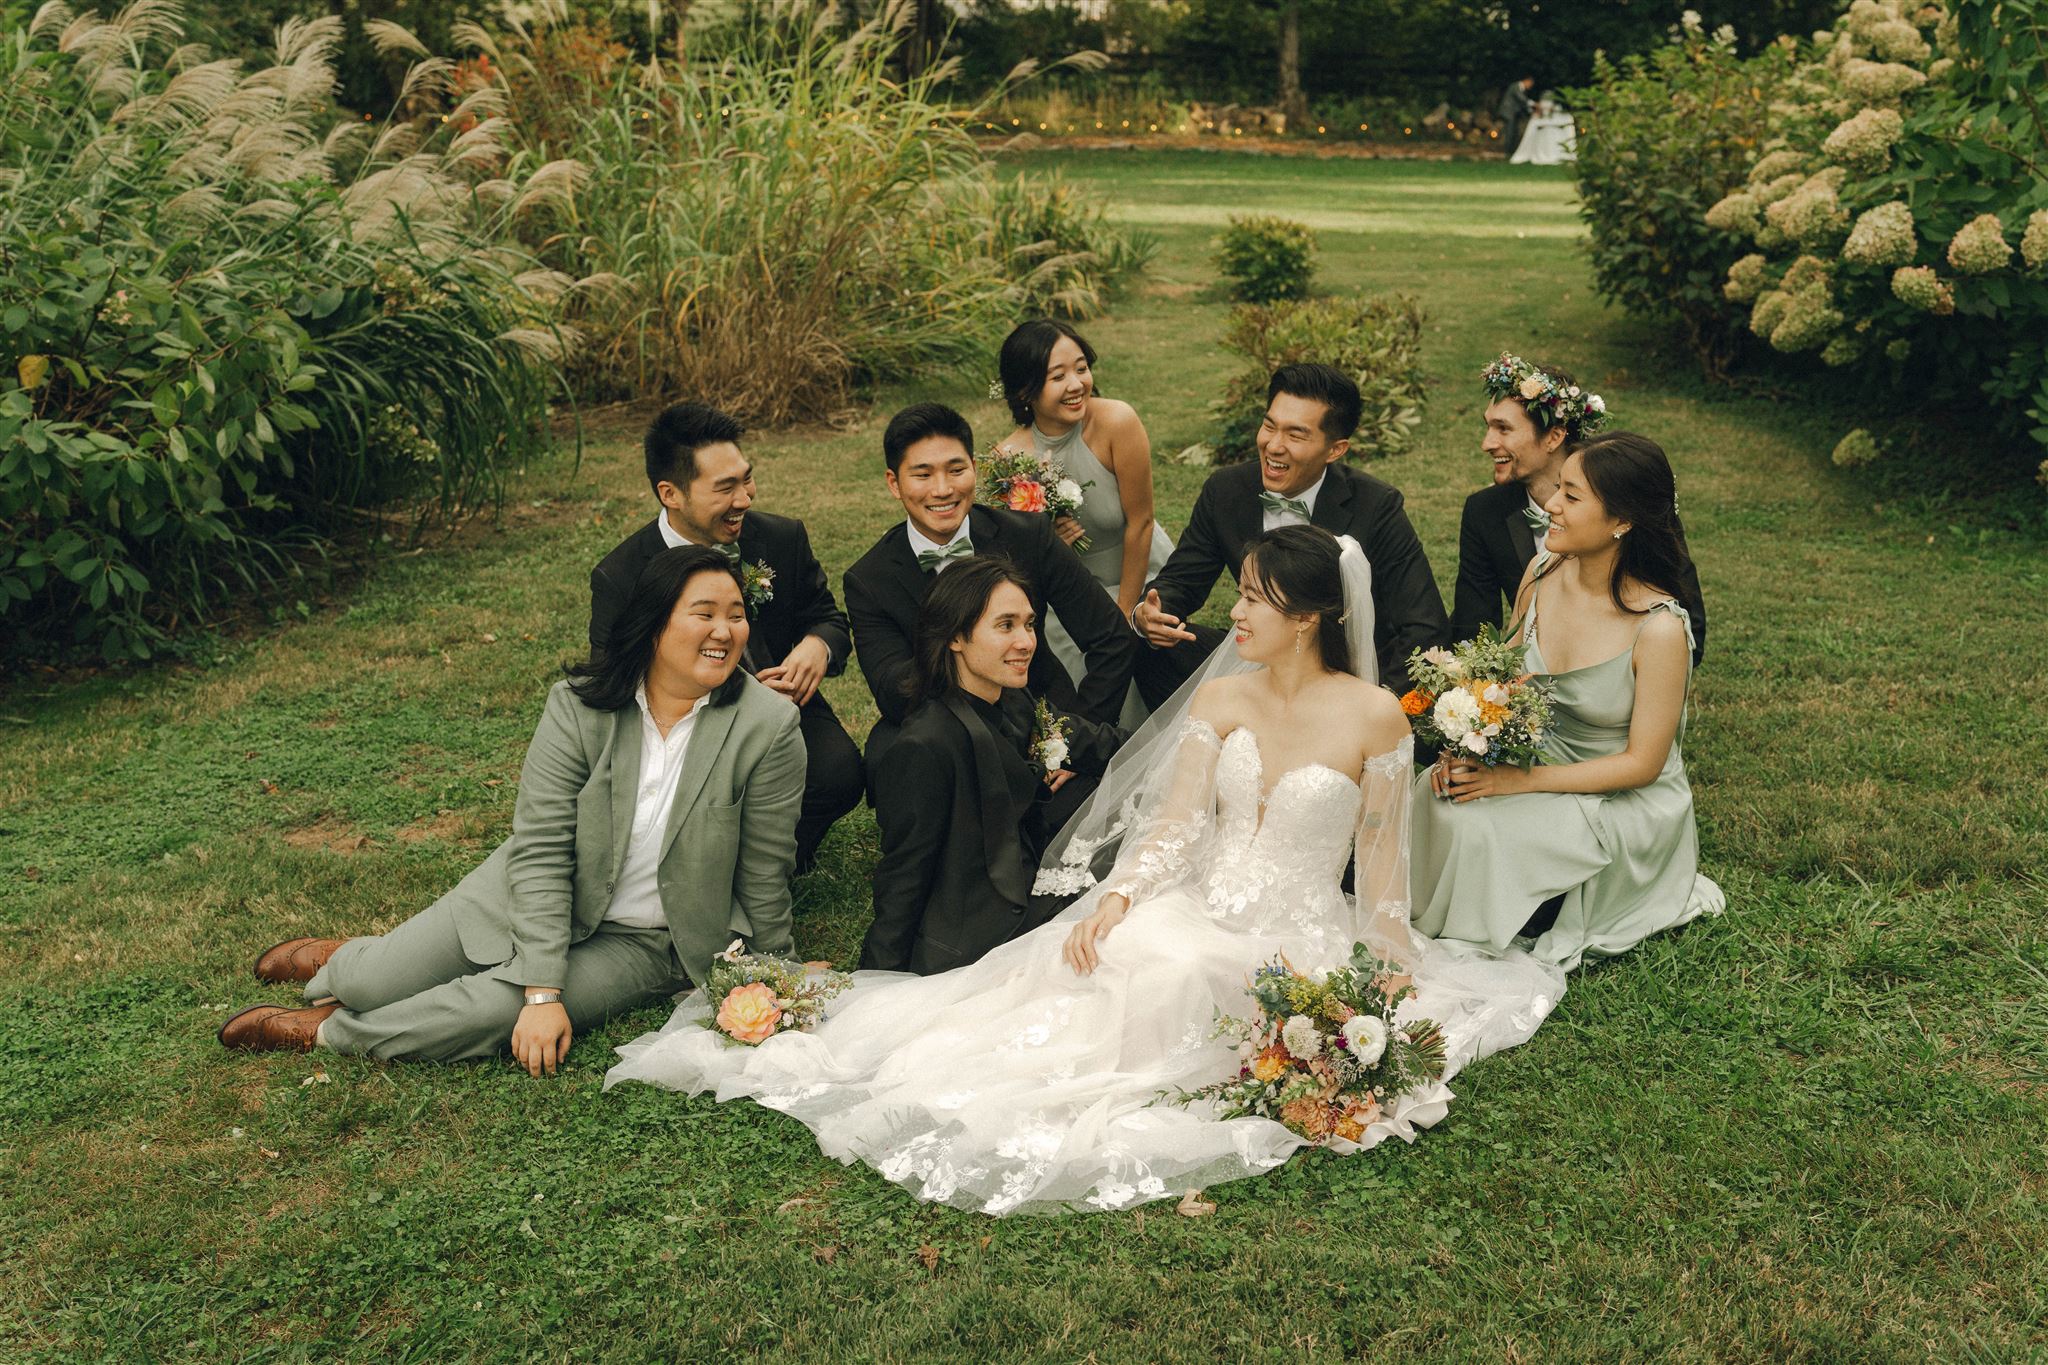 Whimsical secret garden wedding with bridal party sitting on the grass together while laughing